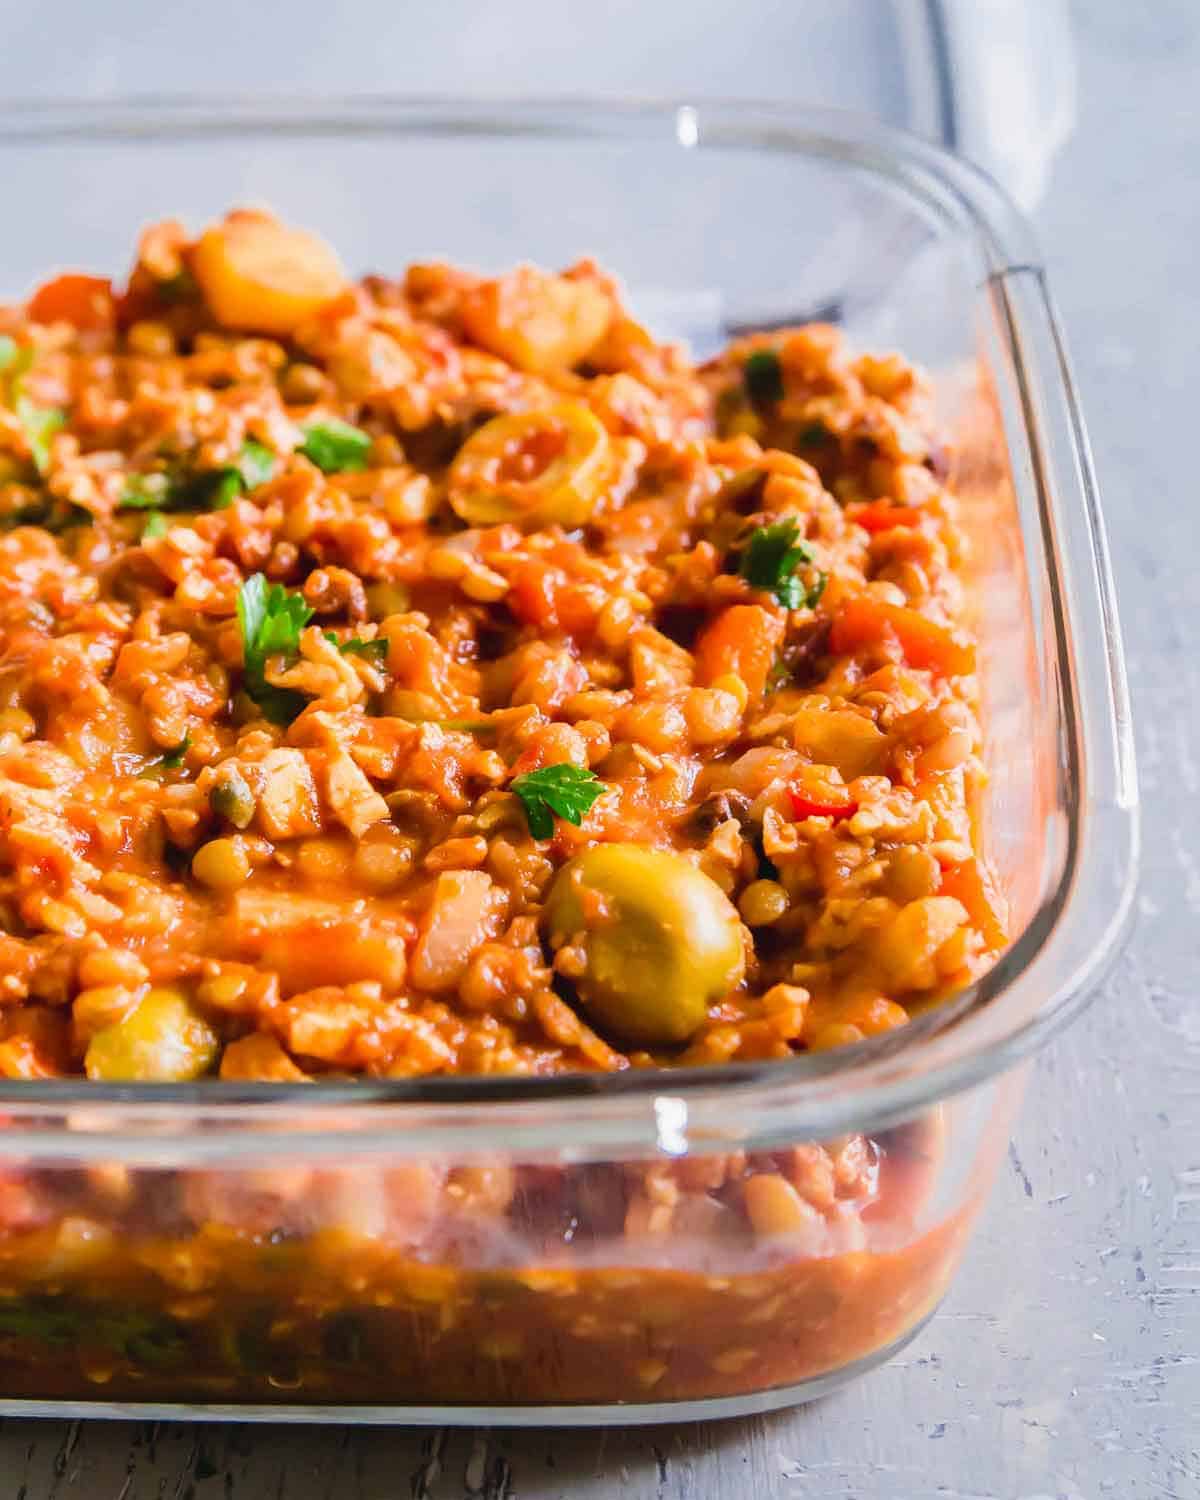 Meal prep this tempeh and lentil picadillo recipe for easy plant based meals throughout the week.